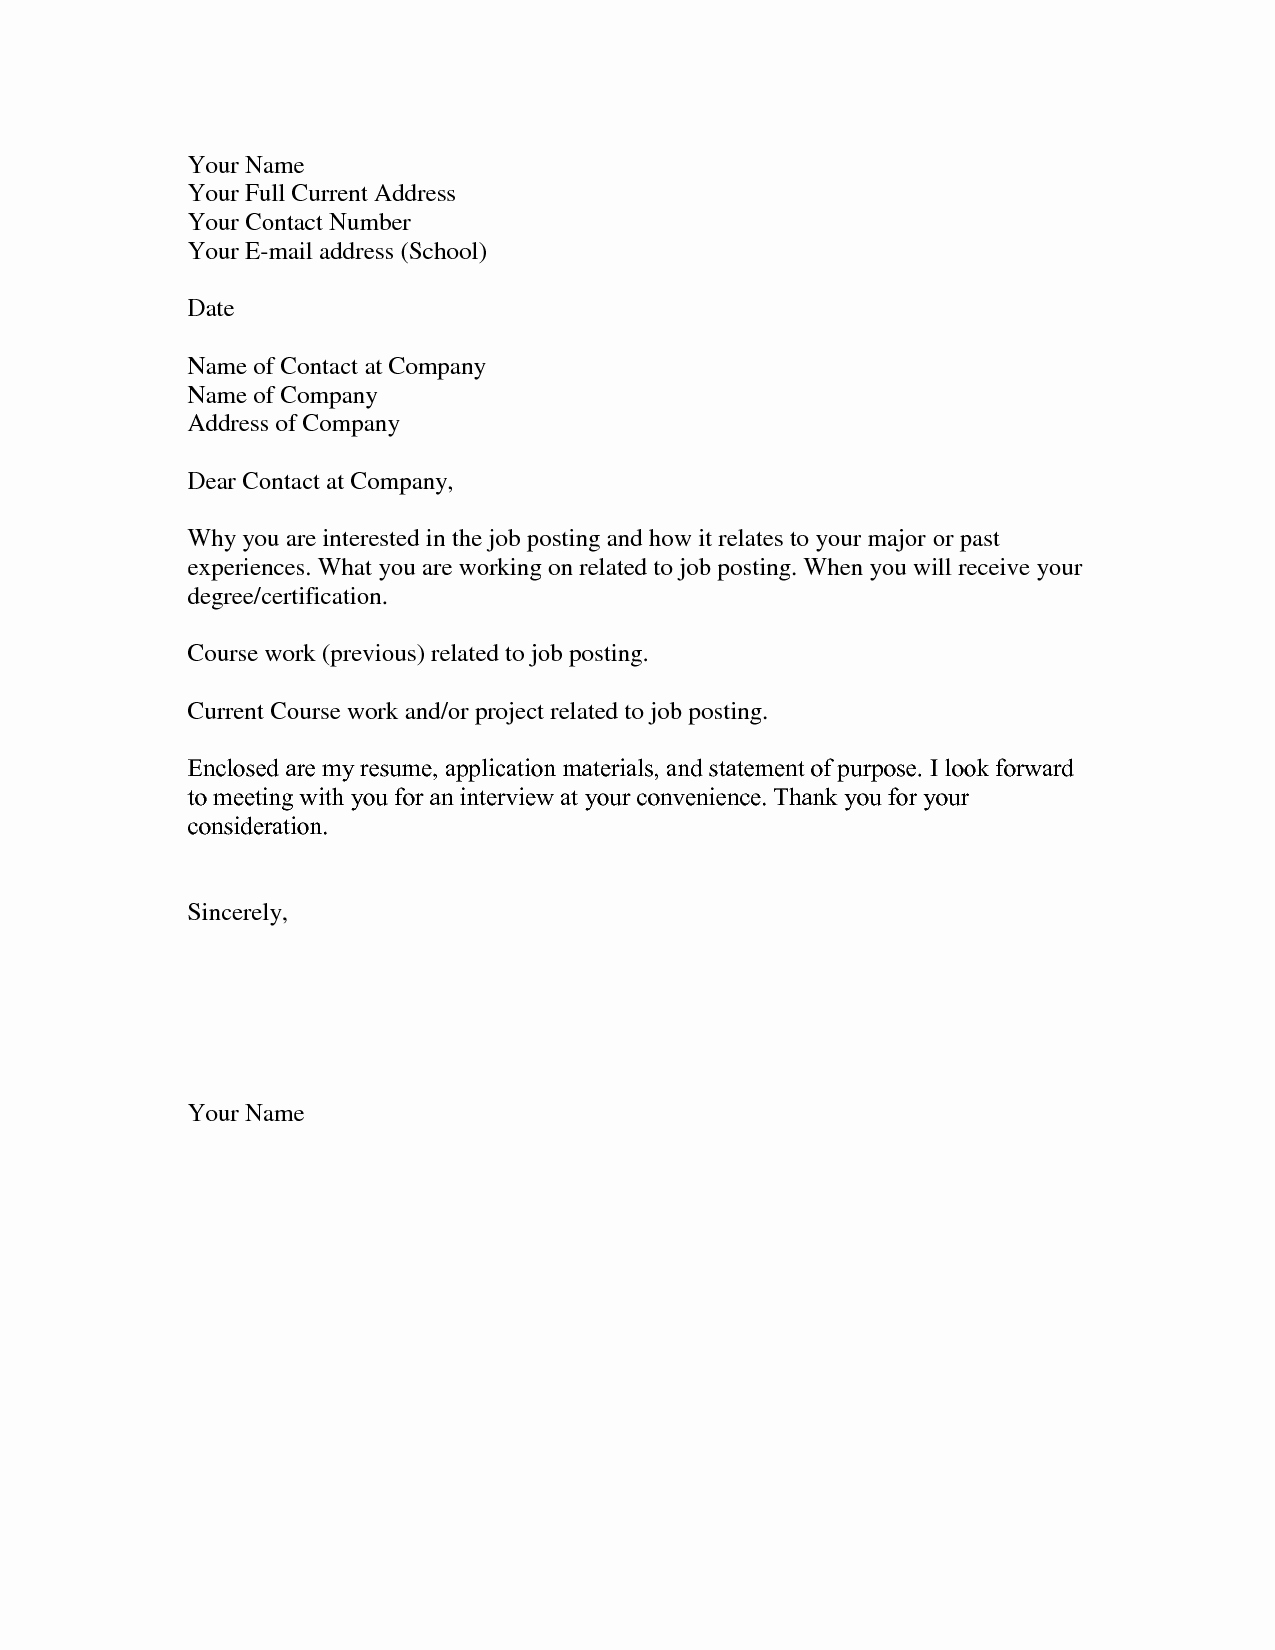 Simple Resume Cover Letter Examples Inspirational Basic Cover Letter Examples